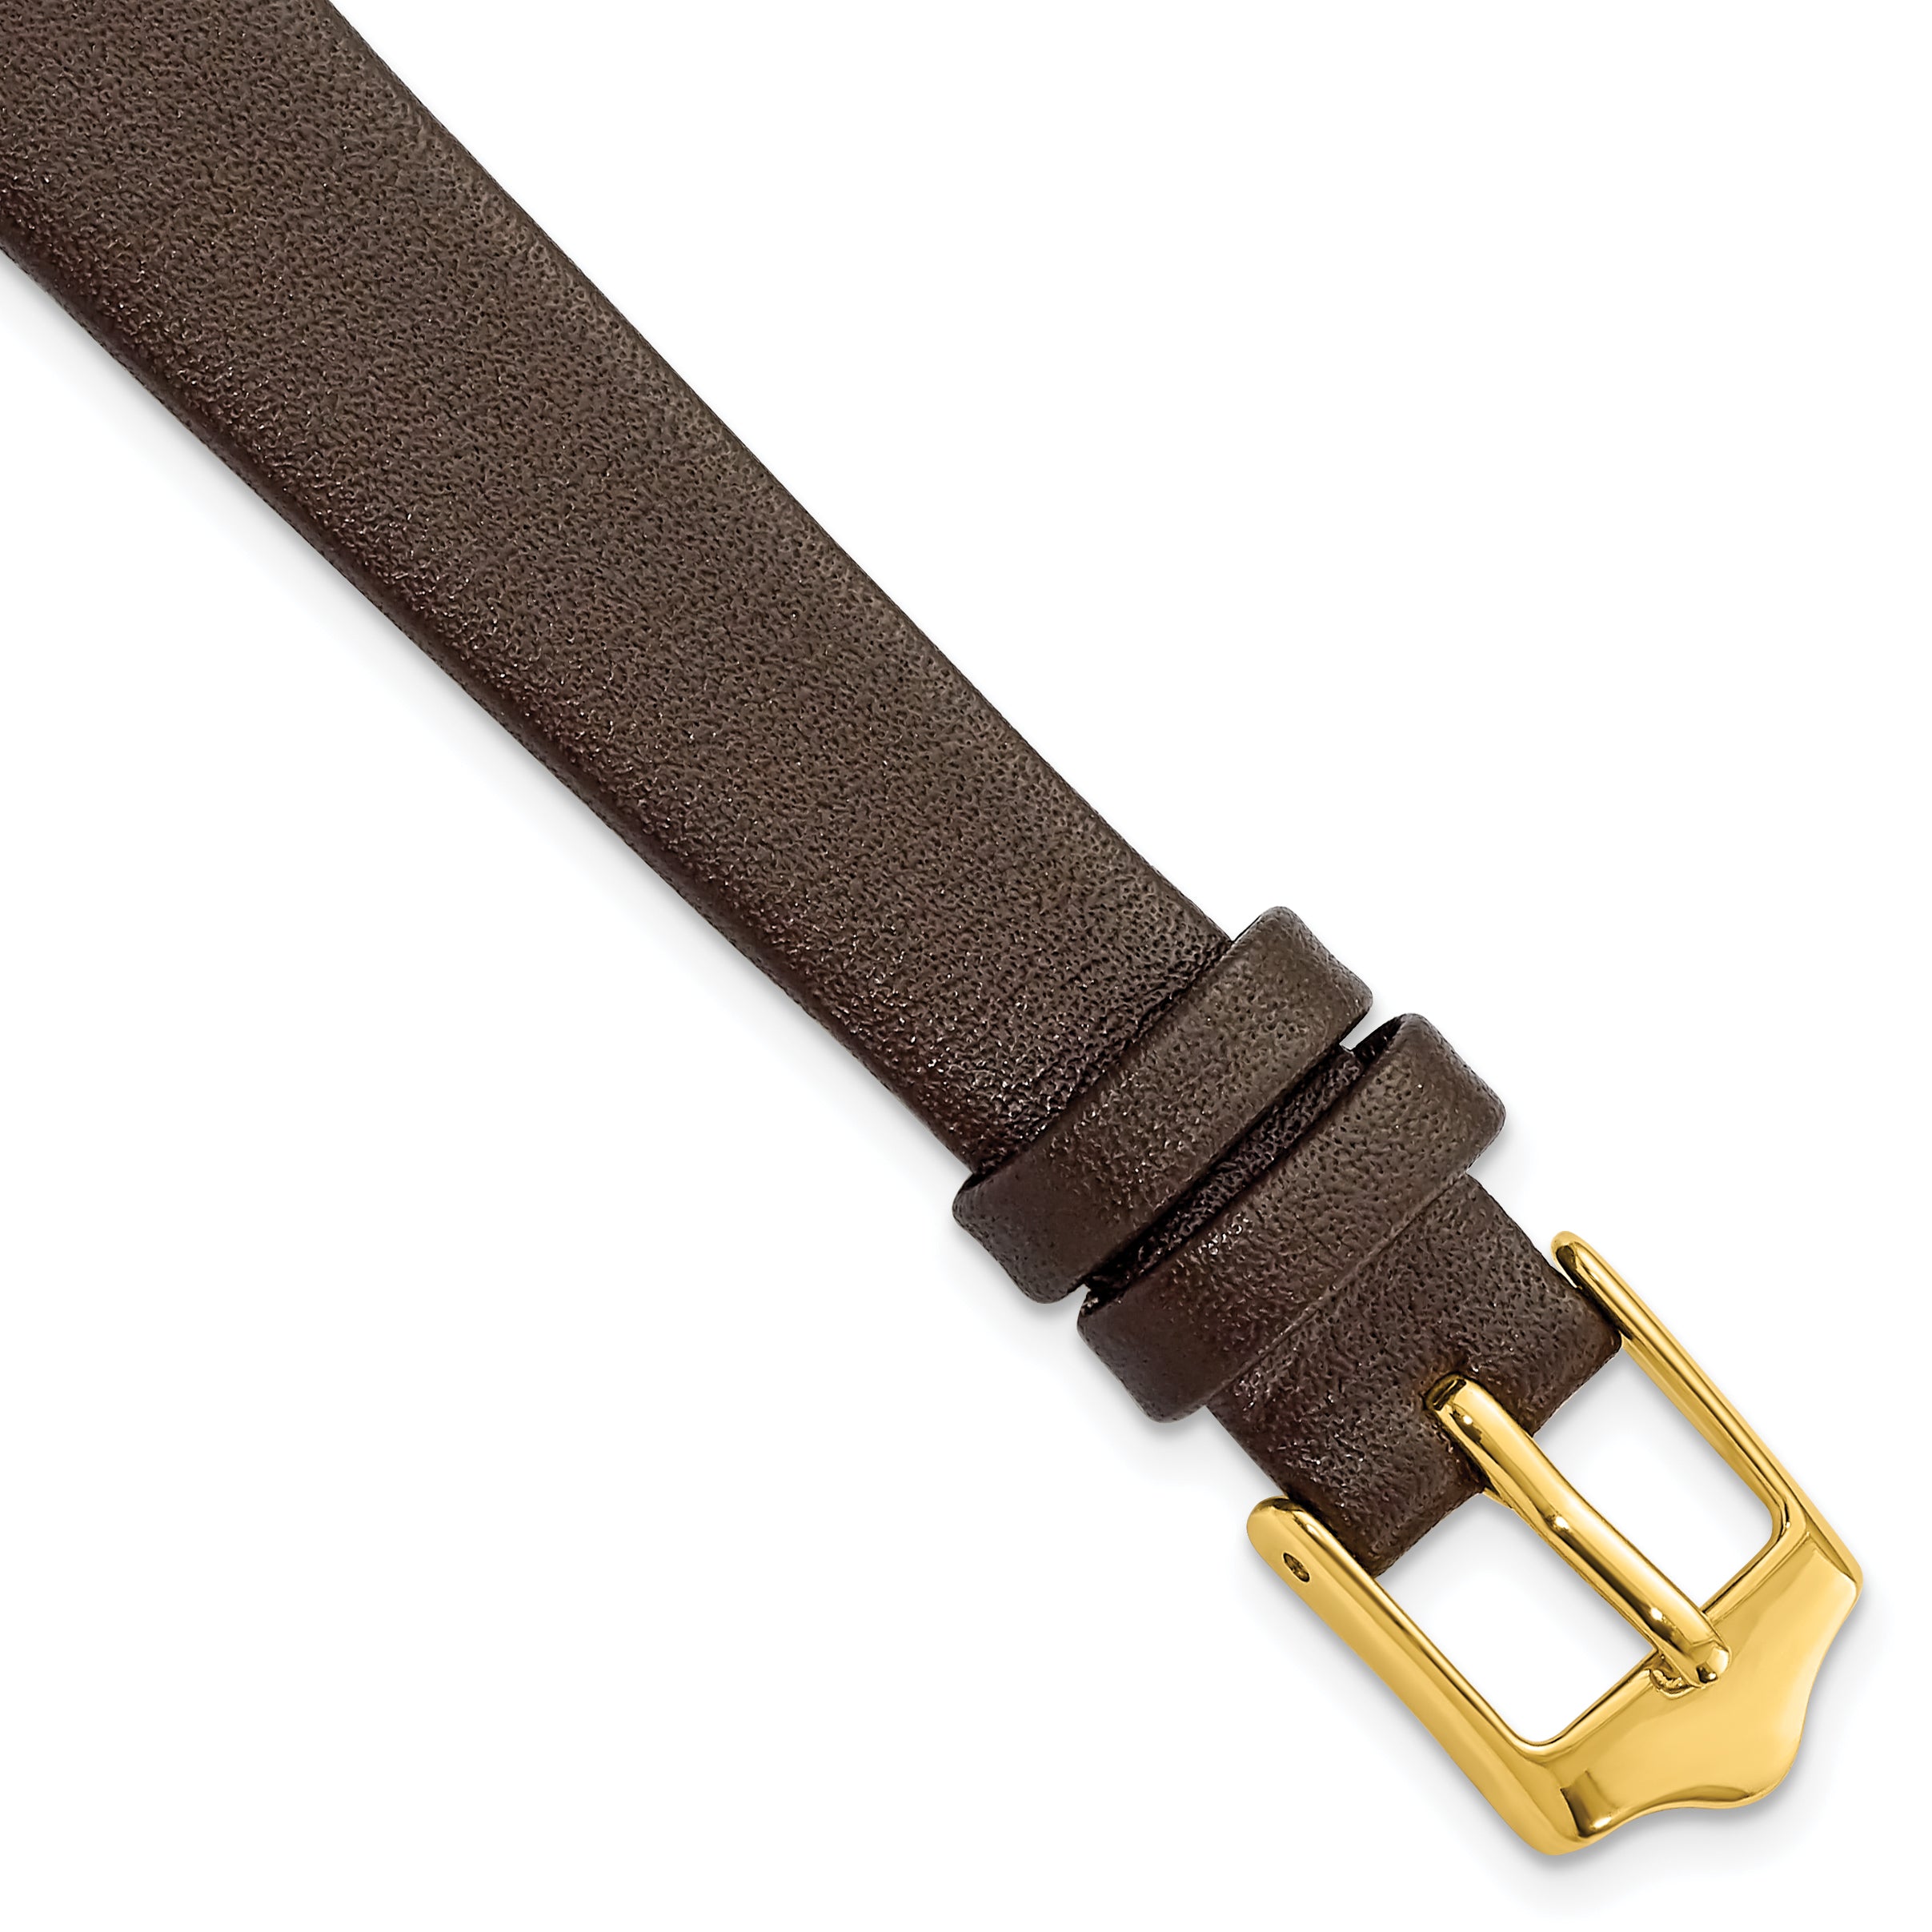 DeBeer 12mm Brown Smooth Flat Leather with Gold-tone Buckle 6.75 inch Watch Band